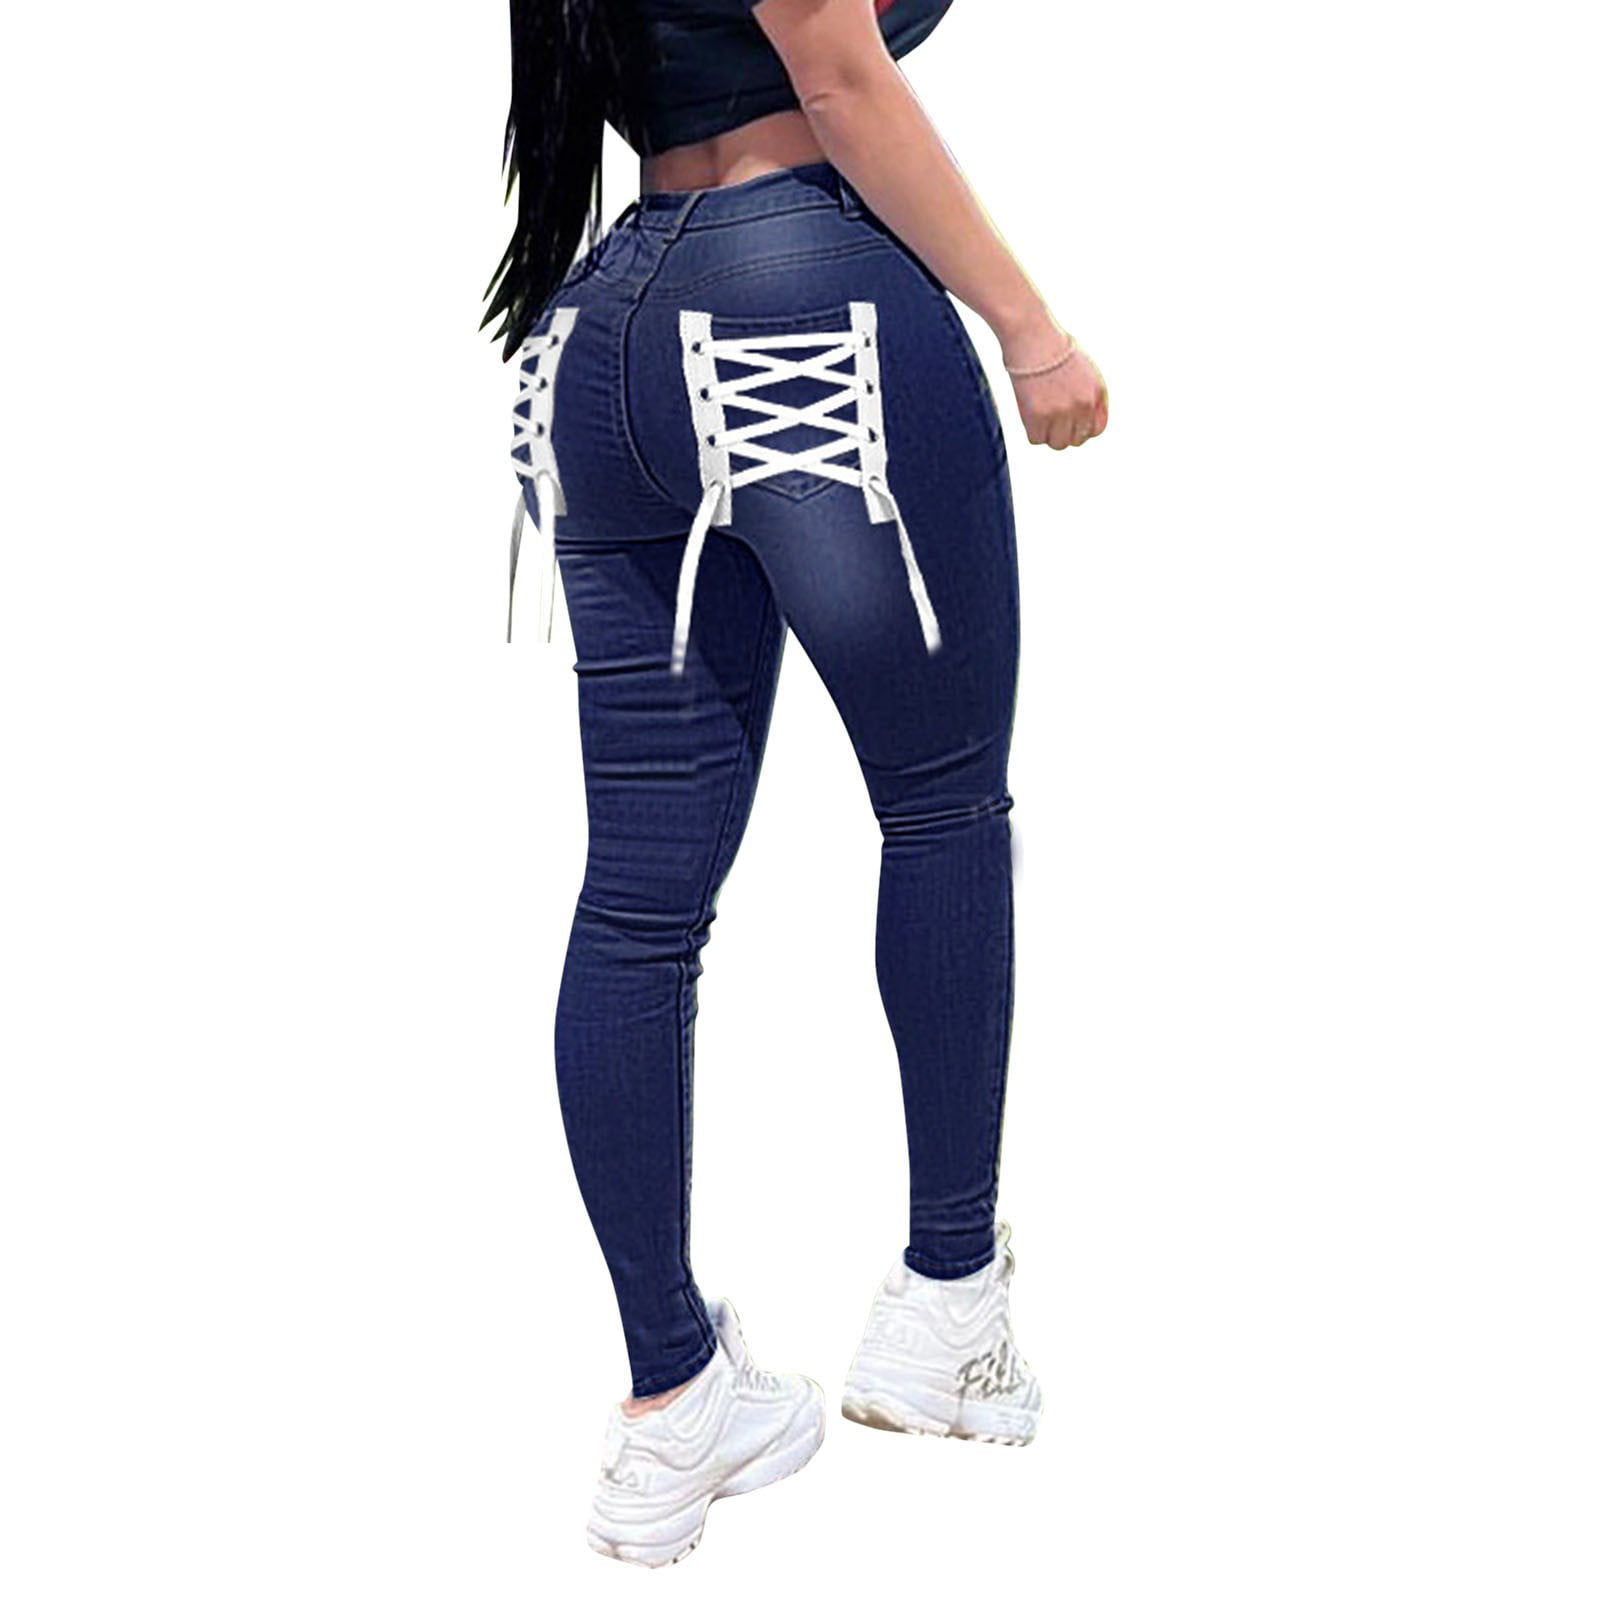 Women ankle length stretchable leggings with secured side pocket